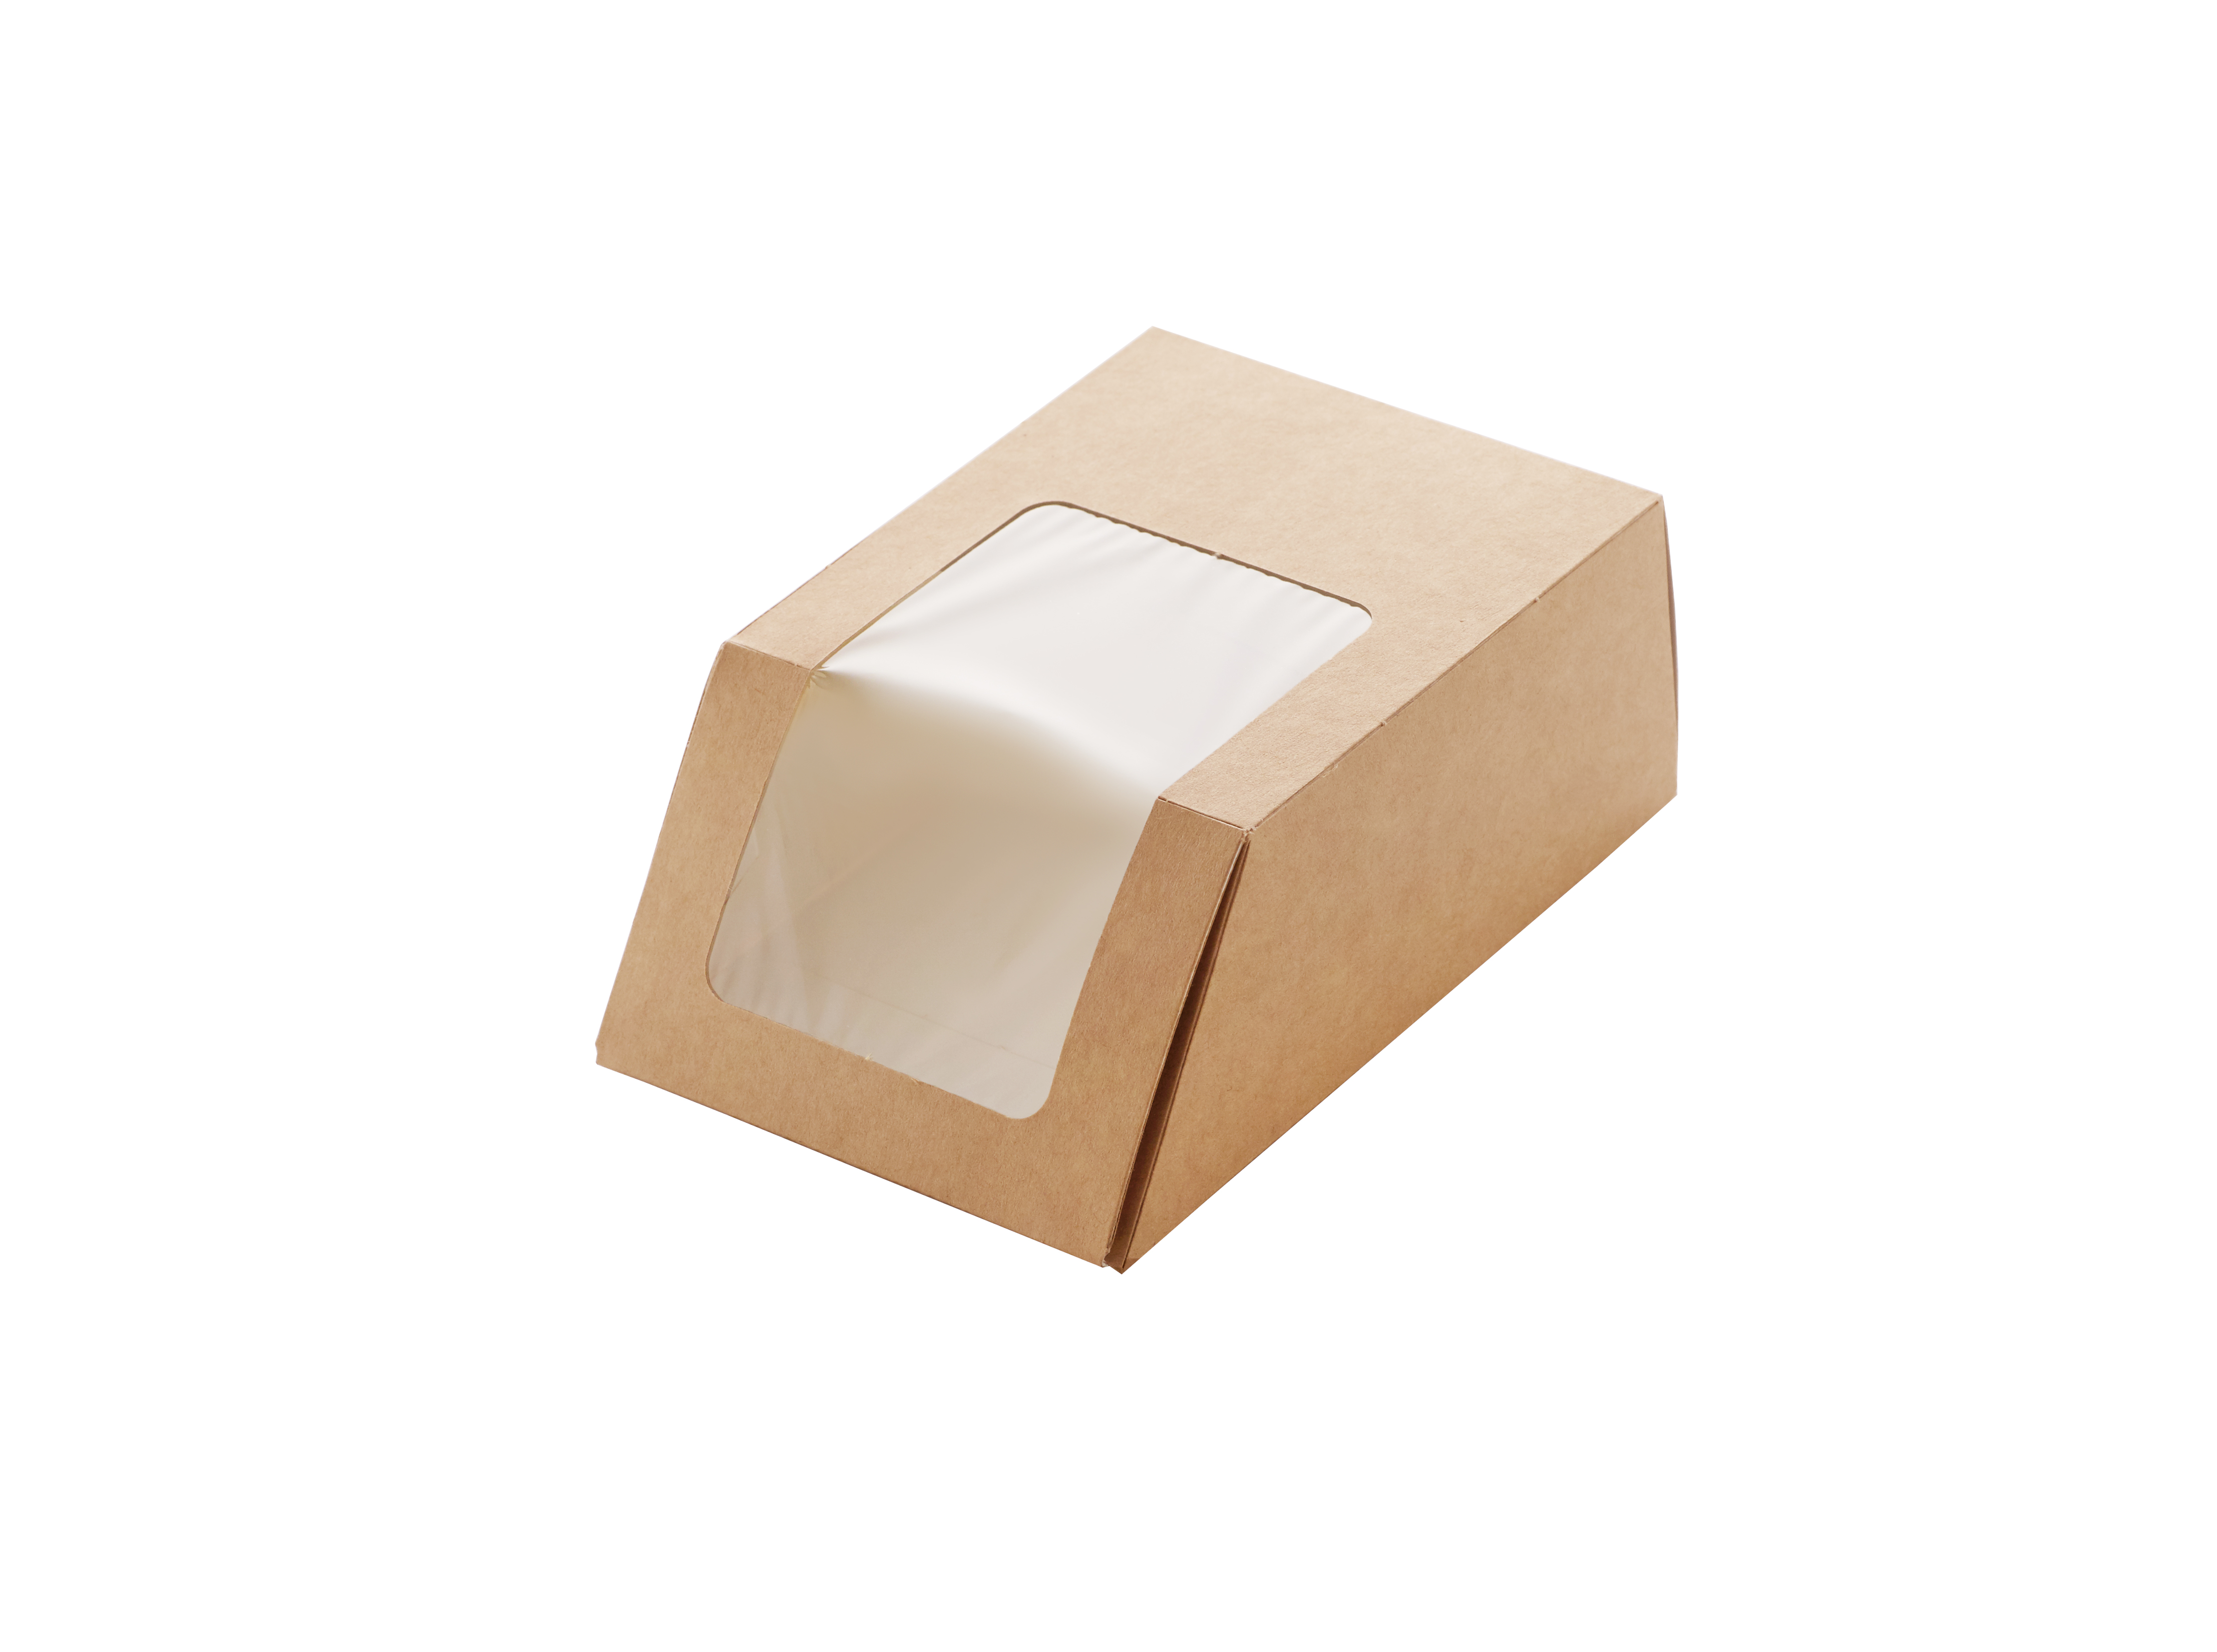 OSQ ROLL packaging for rolls